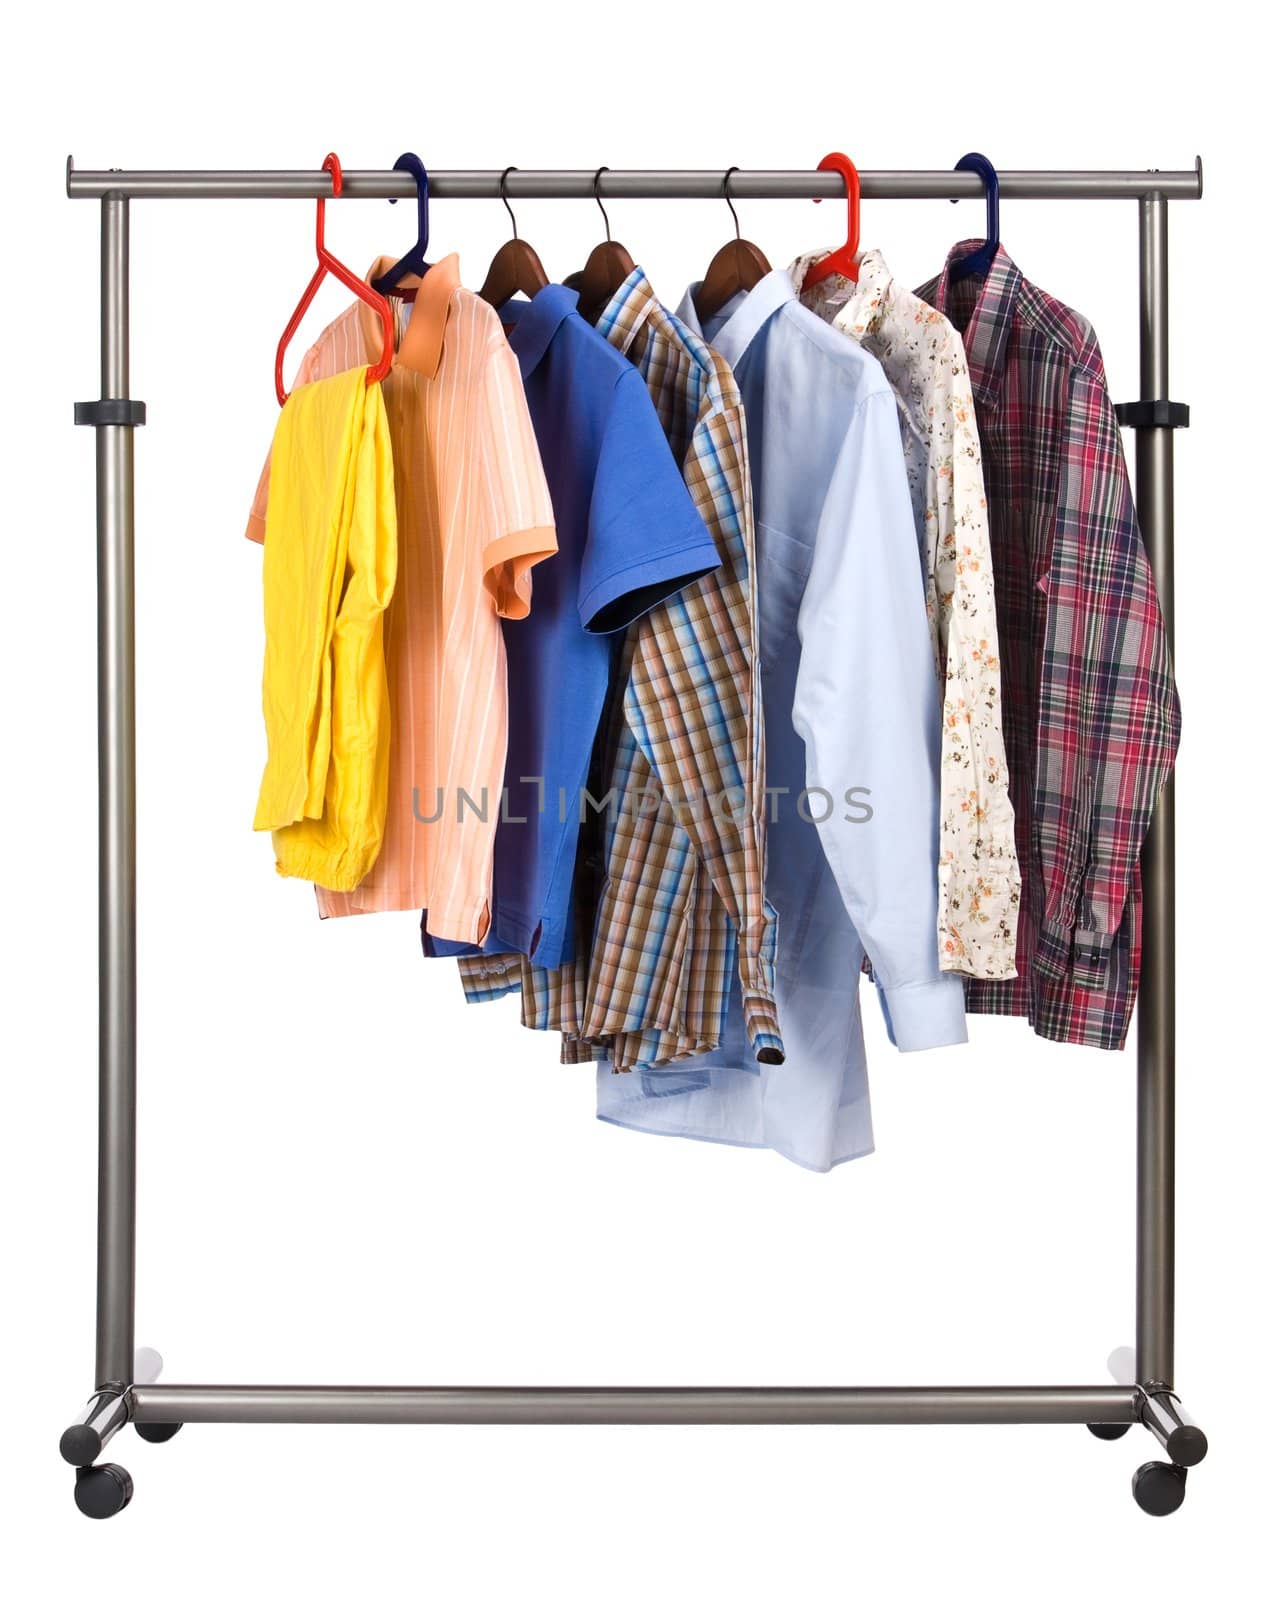 Seven multi-coloured shirts hang on a crossbeam
